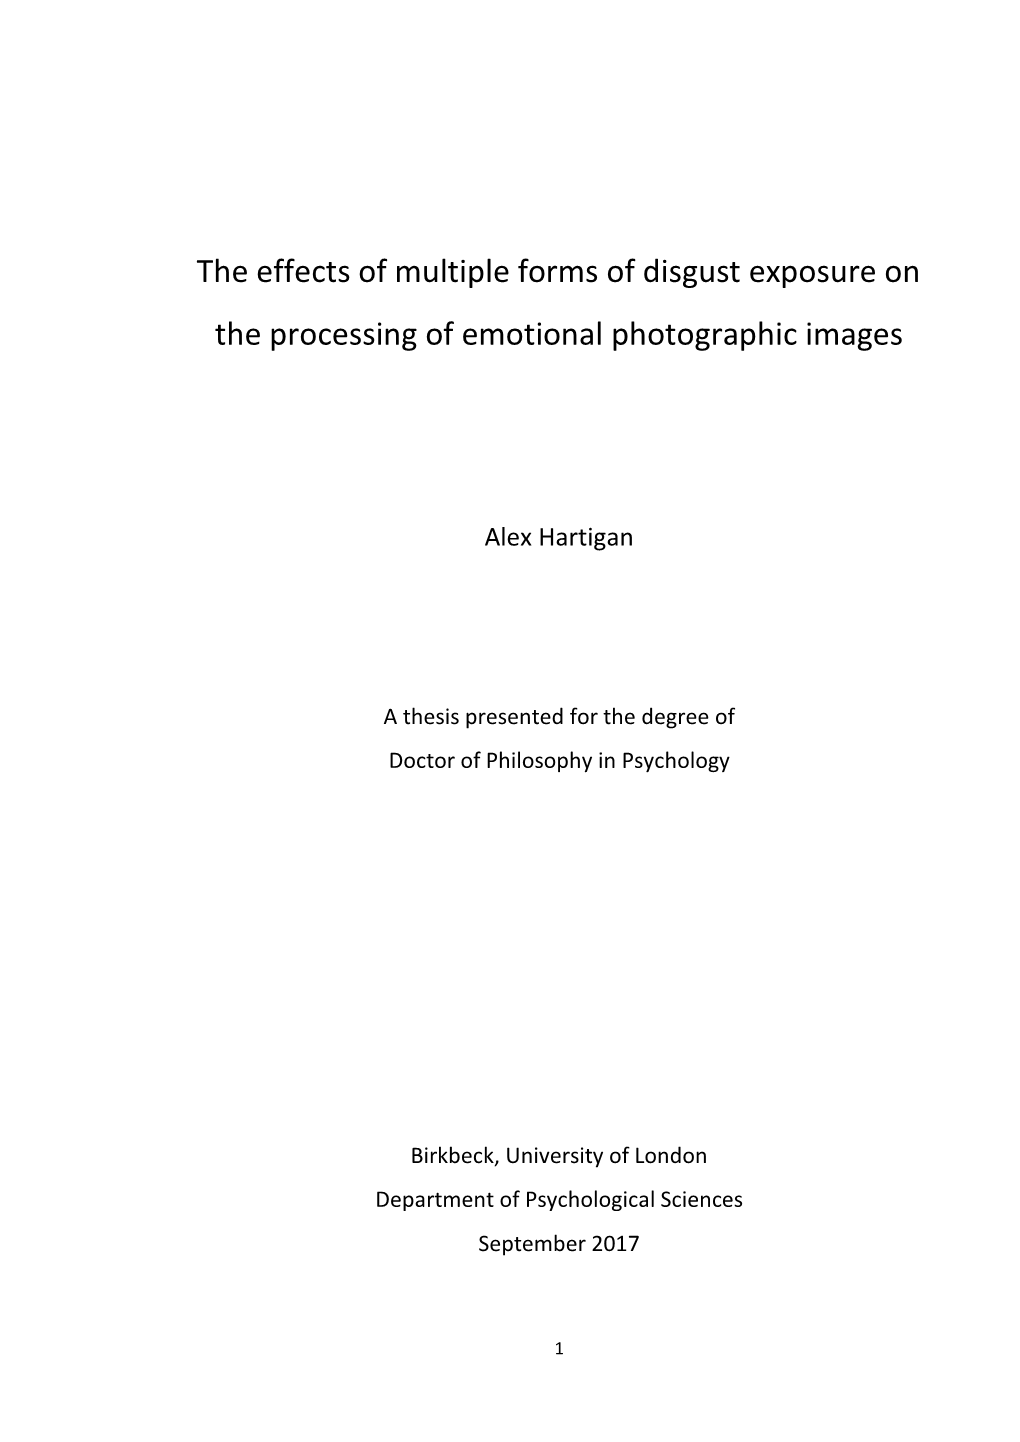 The Effects of Multiple Forms of Disgust Exposure on the Processing of Emotional Photographic Images